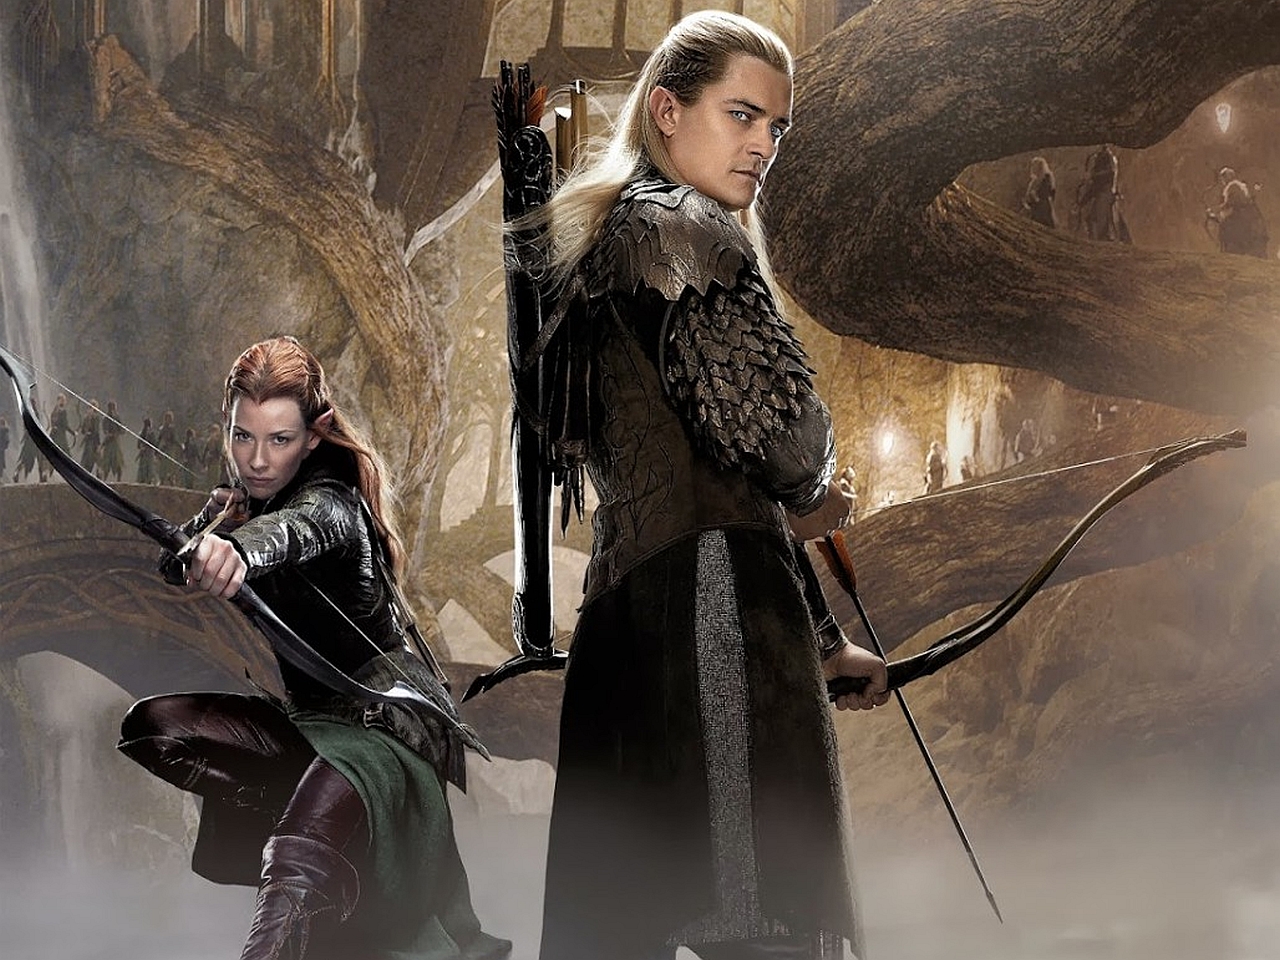 vertical wallpaper the hobbit: the desolation of smaug, orlando bloom, movie, evangeline lilly